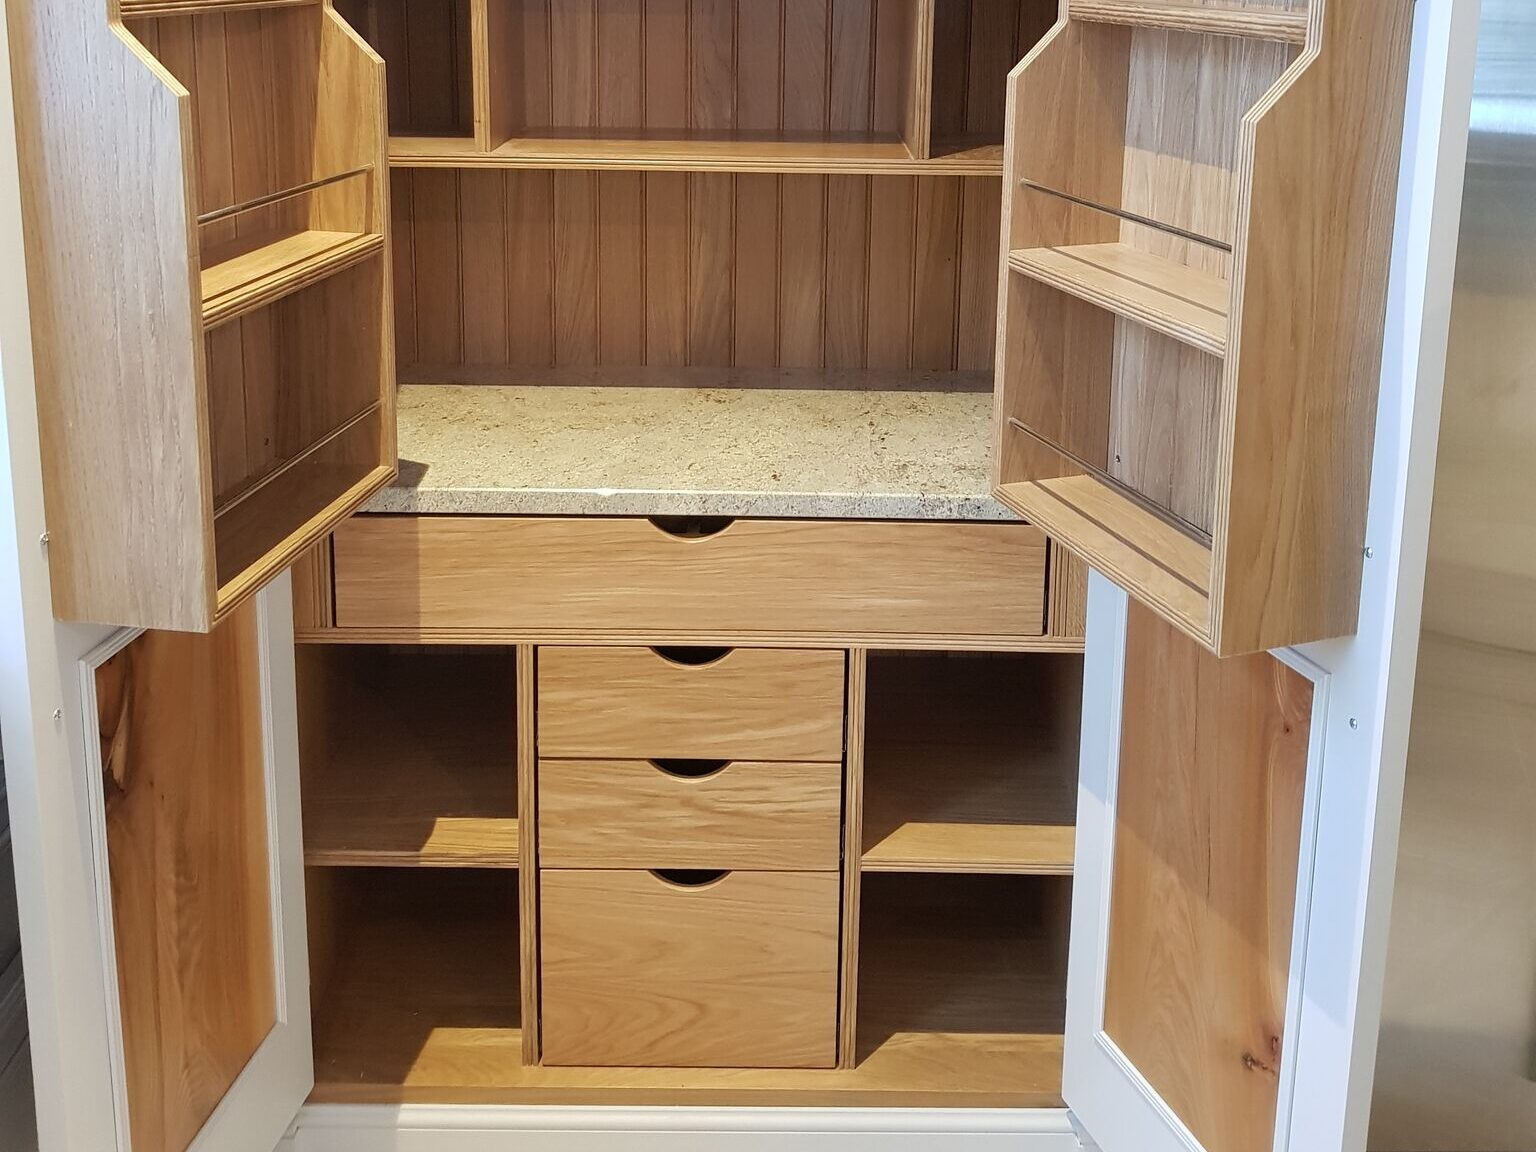 Architectural joinery hand crafted units